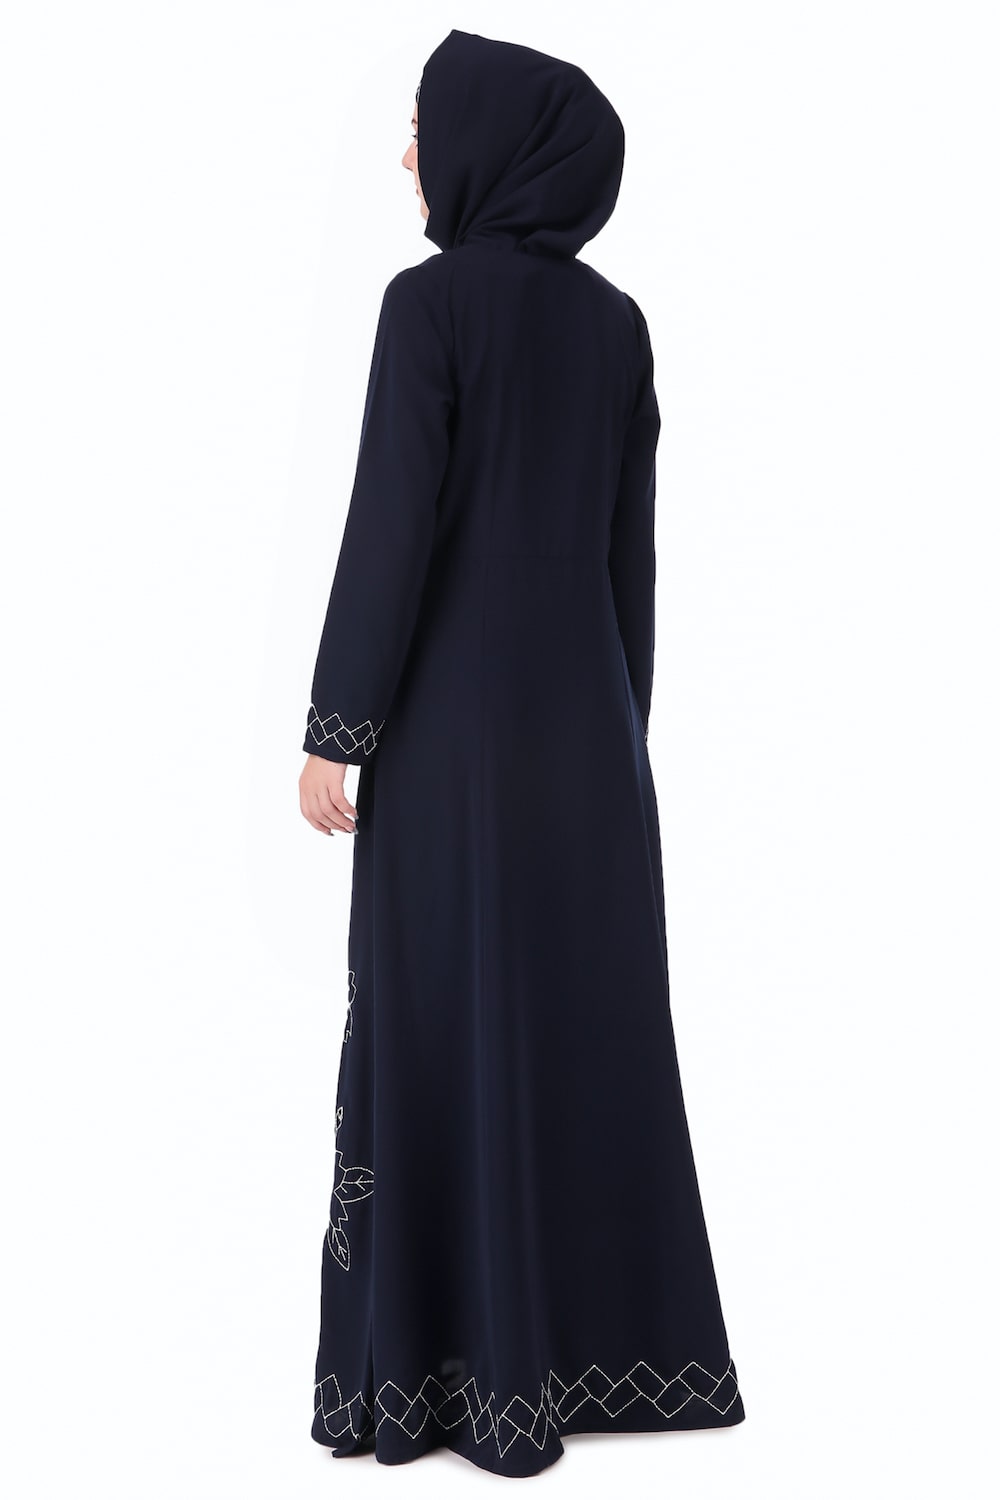 Floral Geo Embroidery Navy Blue Abaya